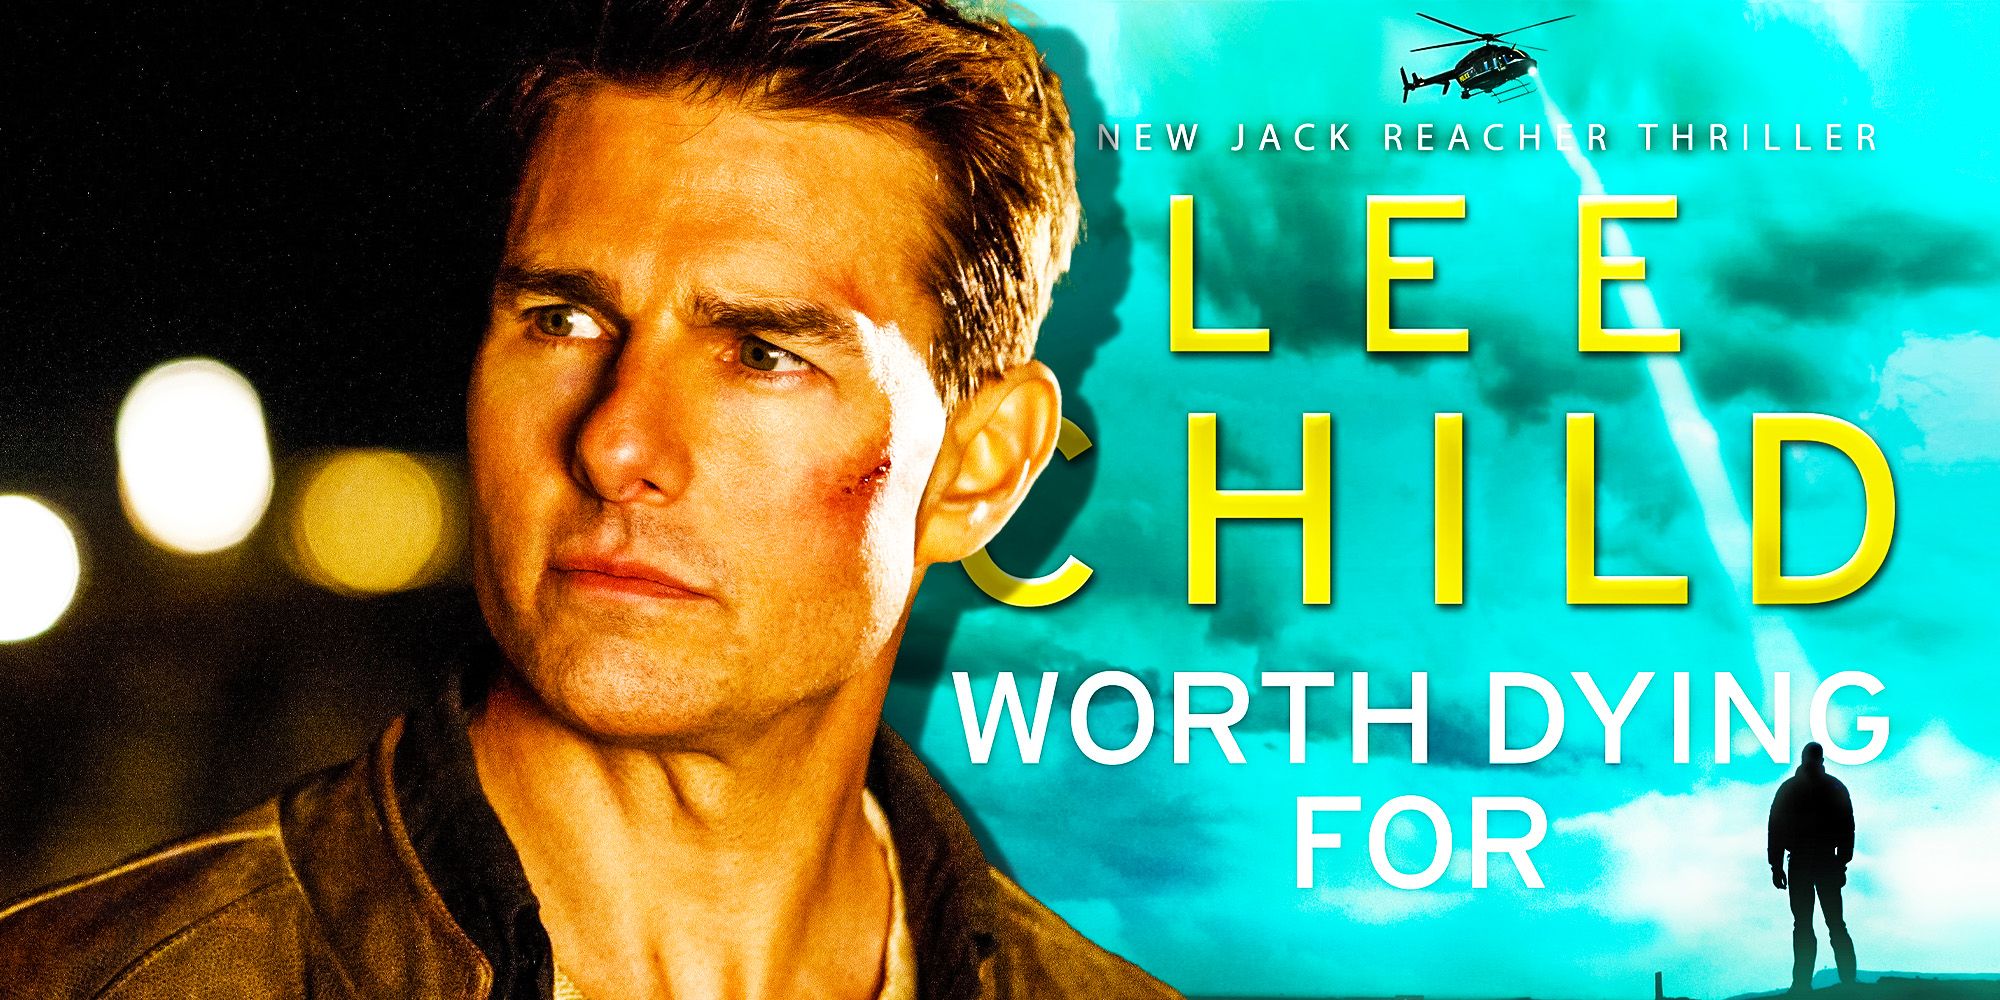 Tom cruise jack reacher worth dying for